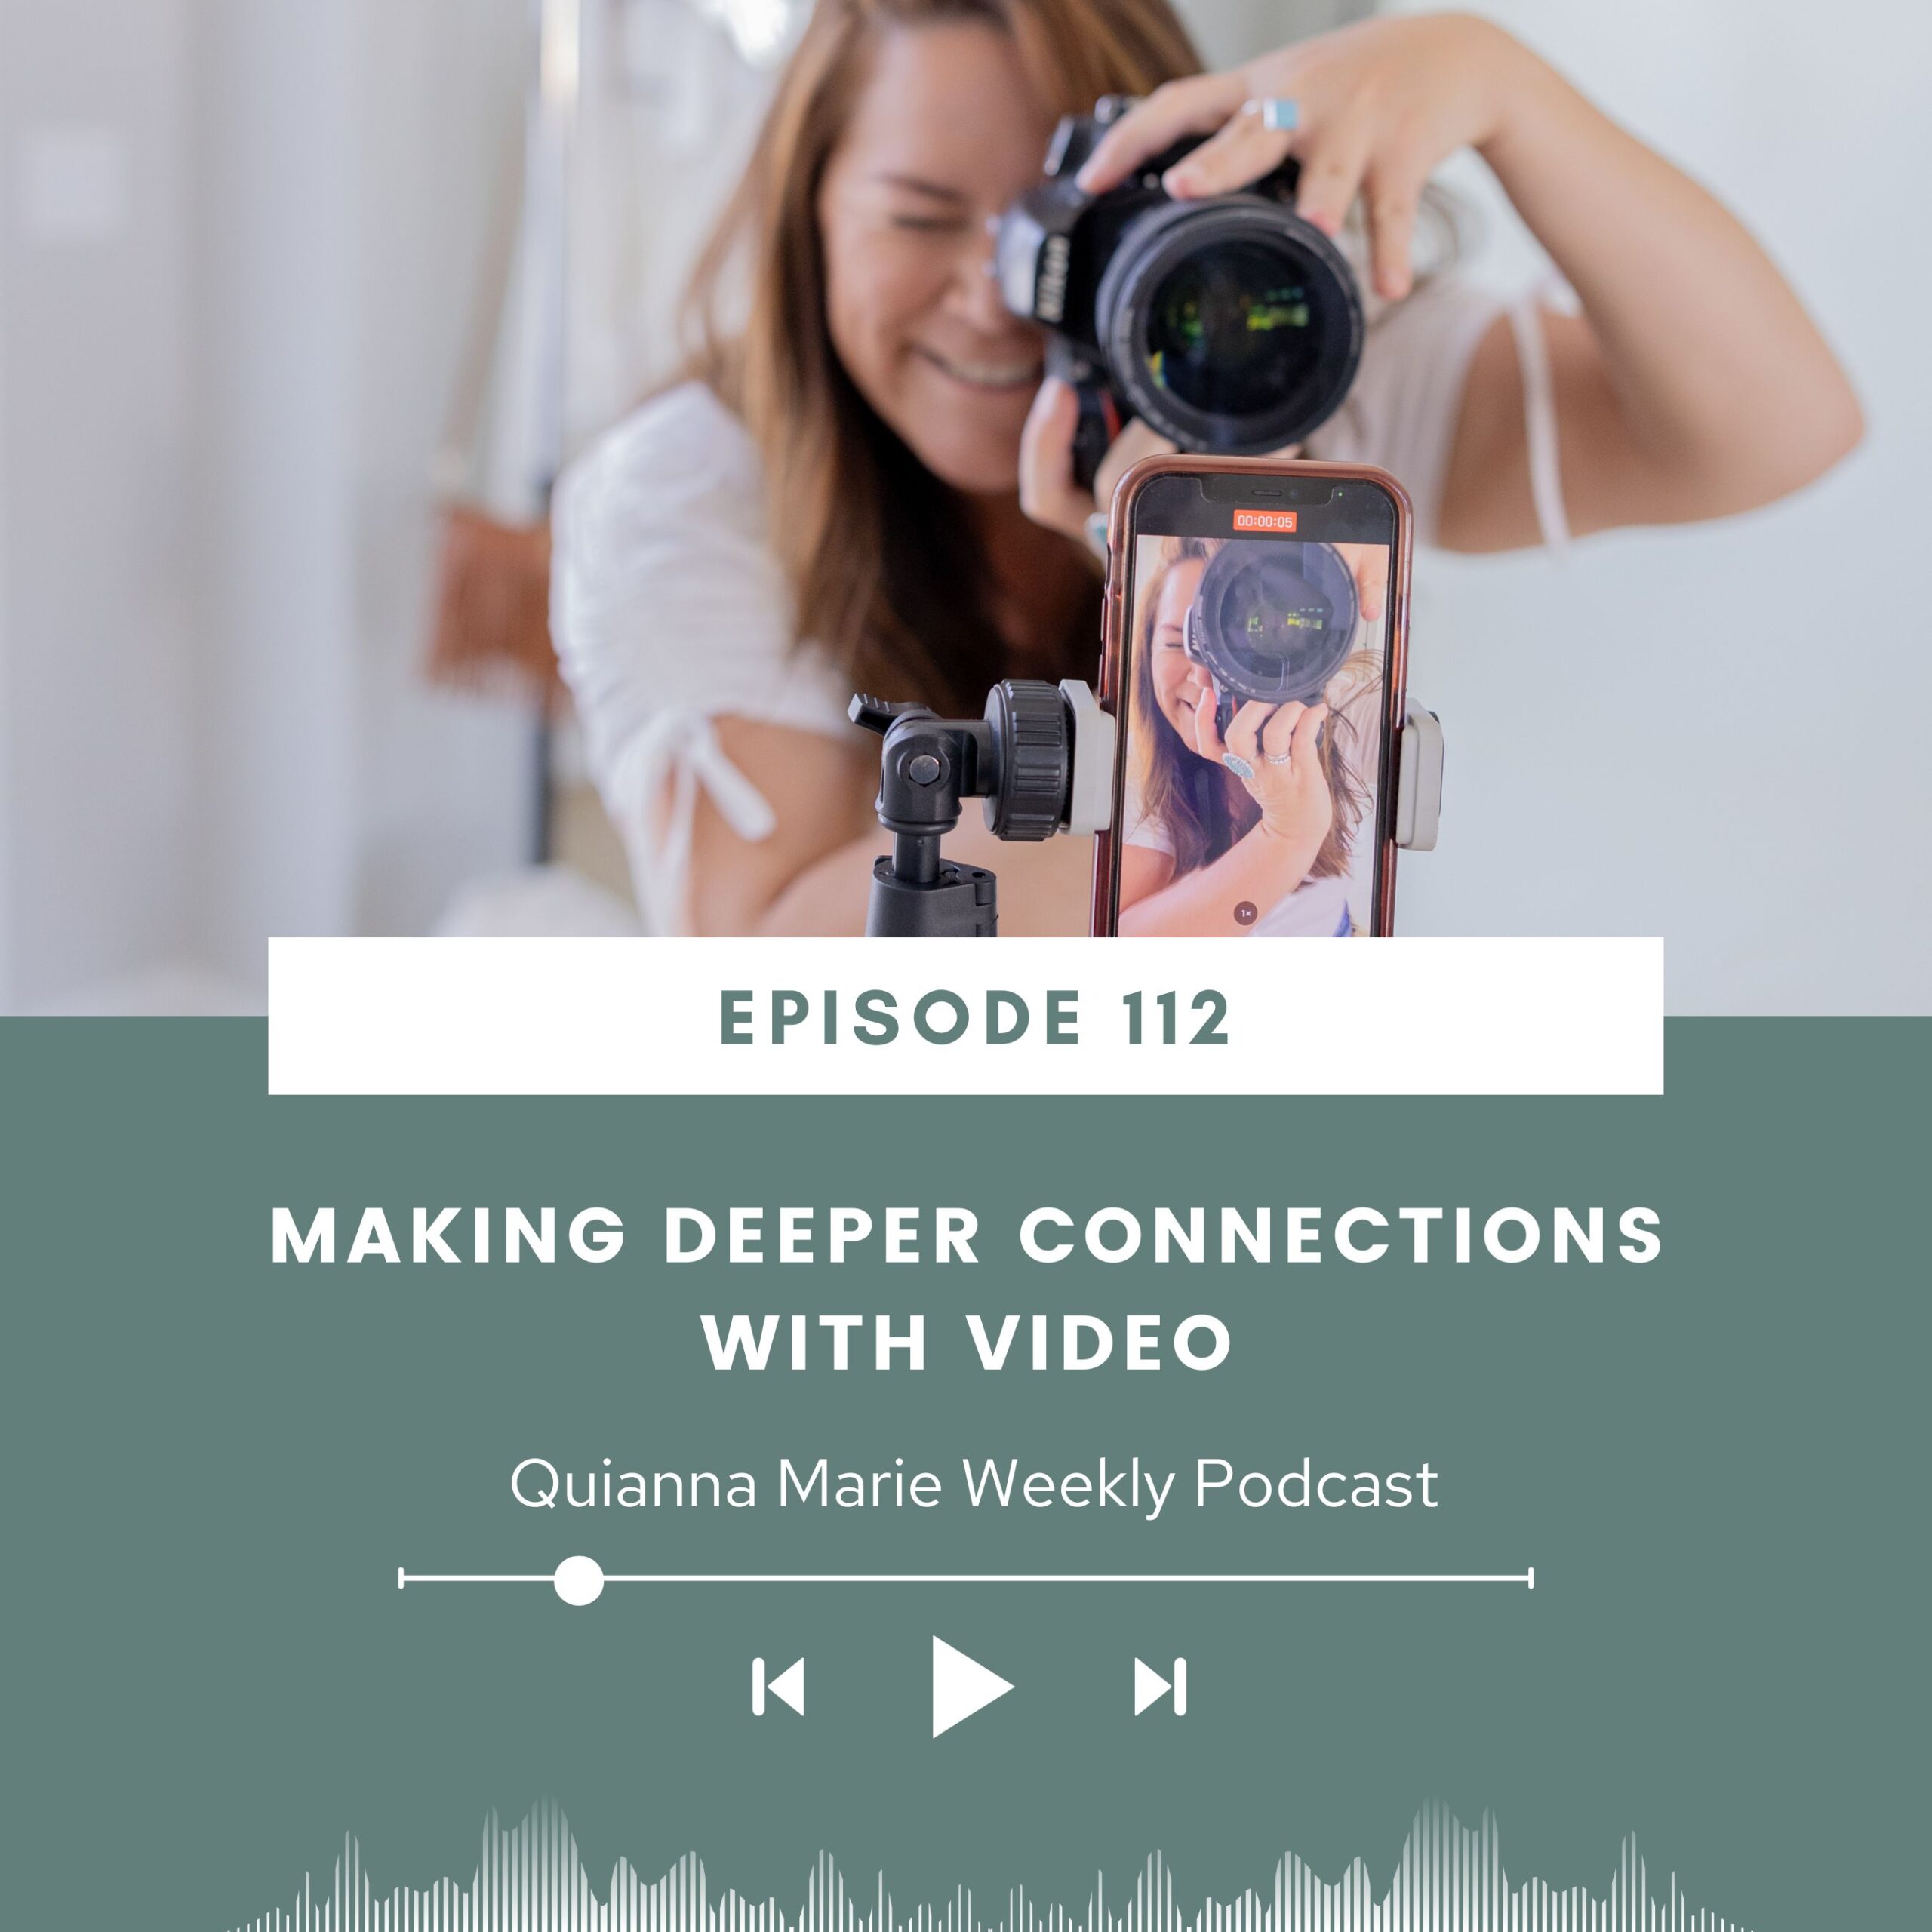 Making deeper connections with video - Quianna Marie Weekly